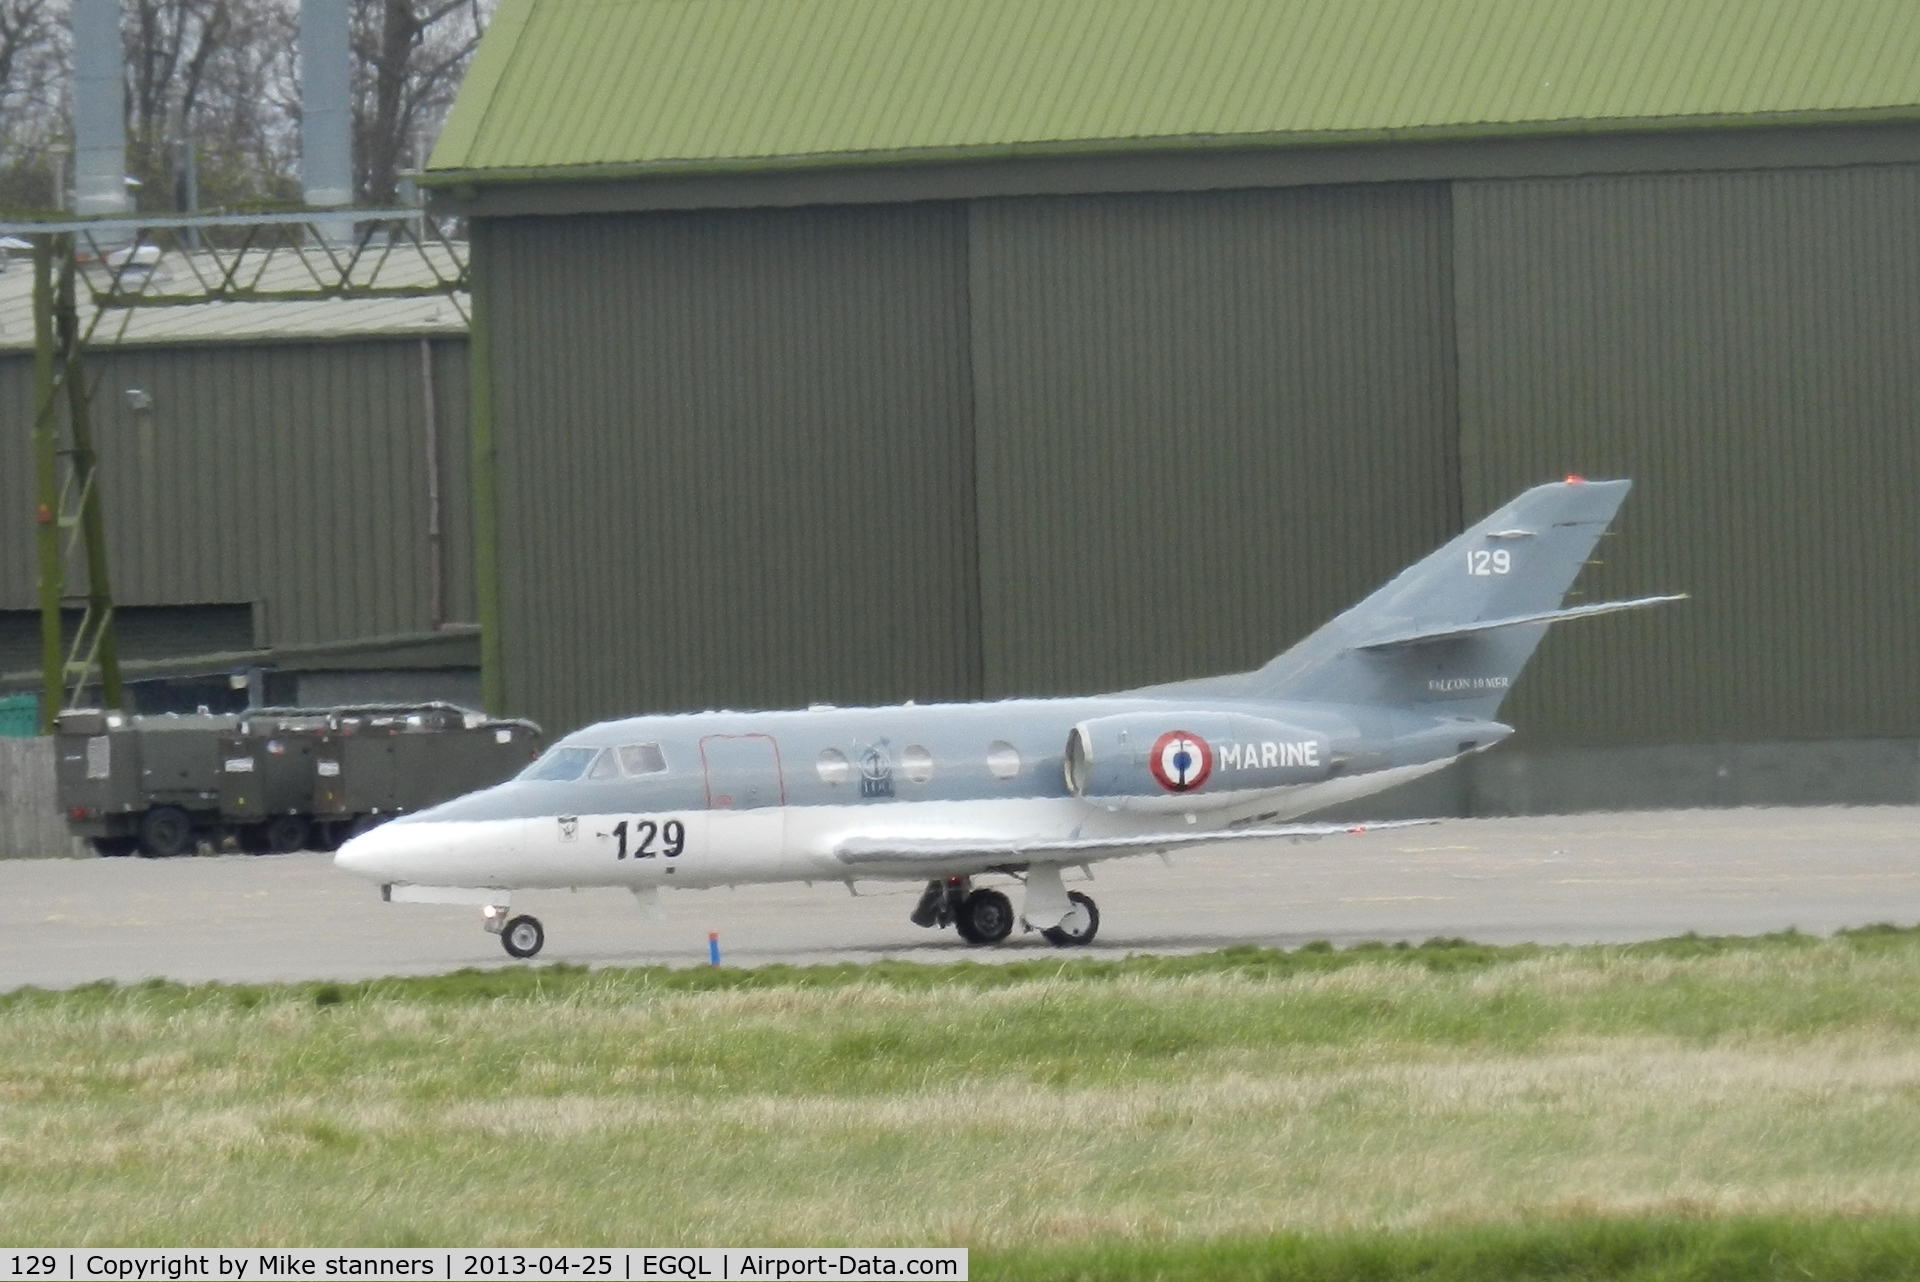 129, 1978 Dassault Falcon 10MER C/N 129, 57S Falcon 10 arrives at Leuchars on a support flight for the French navy detachment during exercise joint warrior 13-1